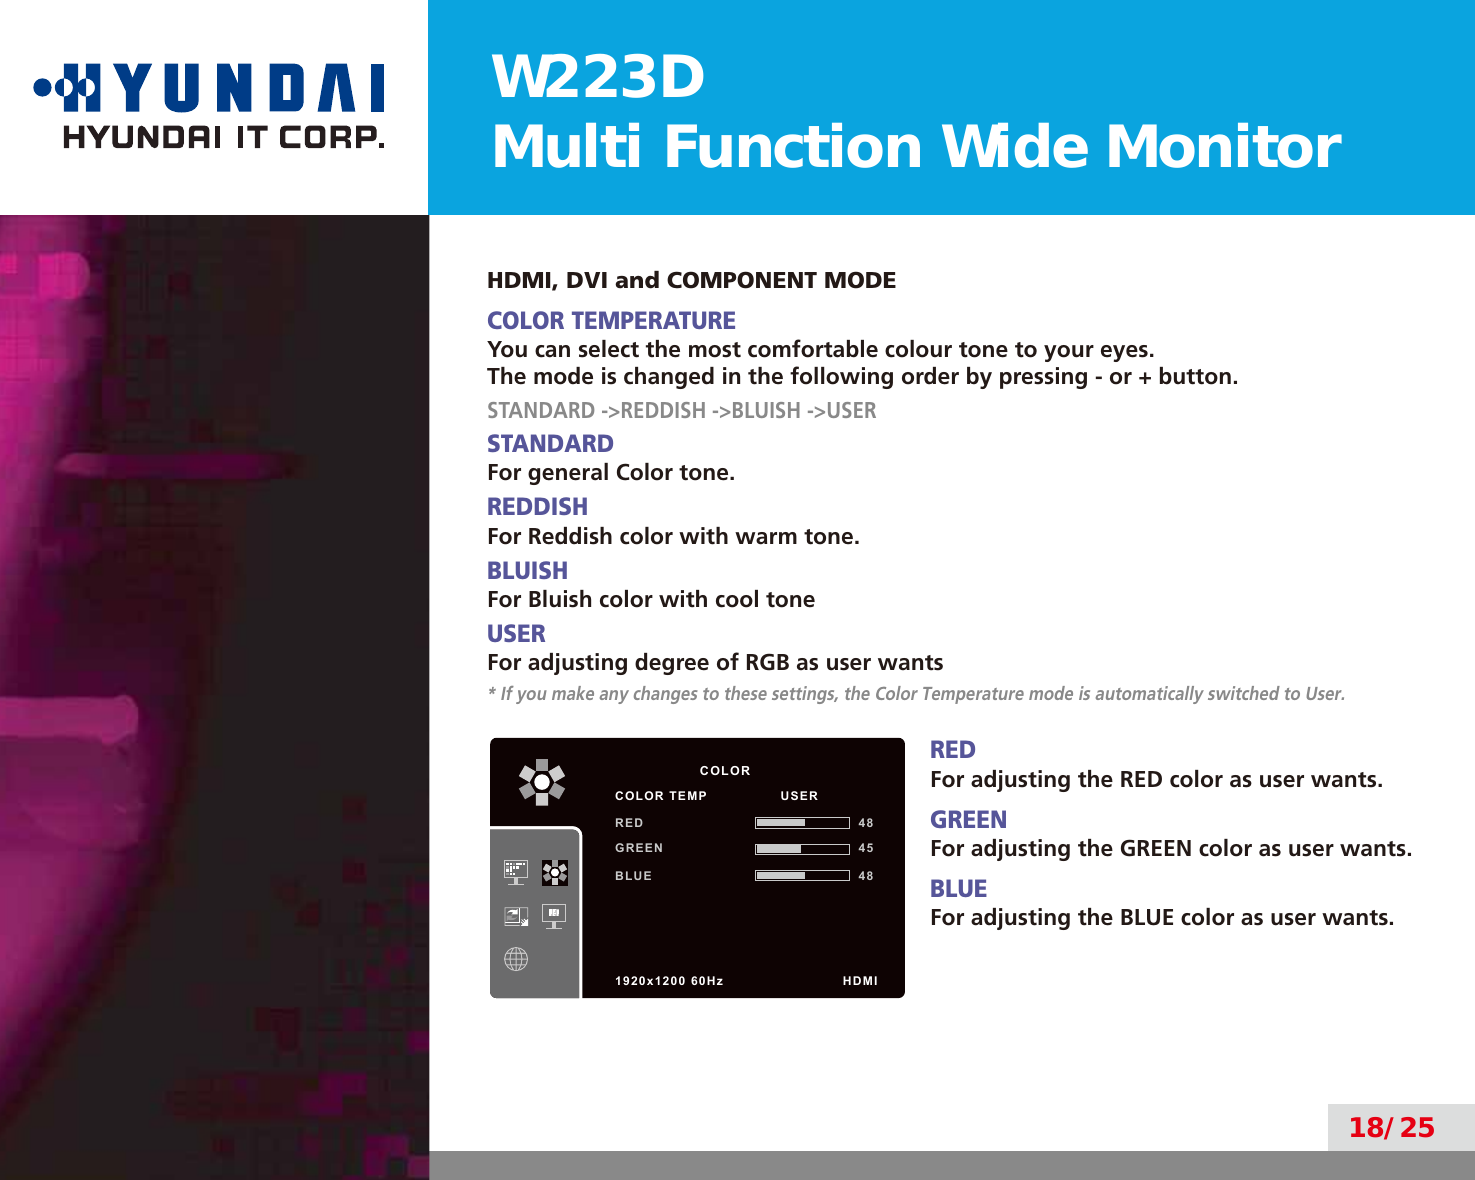 W223DMulti Function Wide Monitor18/25HDMI, DVI and COMPONENT MODECOLOR TEMPERATUREYou can select the most comfortable colour tone to your eyes.The mode is changed in the following order by pressing - or + button.STANDARD -&gt;REDDISH -&gt;BLUISH -&gt;USERSTANDARDFor general Color tone.REDDISHFor Reddish color with warm tone.BLUISHFor Bluish color with cool toneUSERFor adjusting degree of RGB as user wants* If you make any changes to these settings, the Color Temperature mode is automatically switched to User.REDFor adjusting the RED color as user wants.GREENFor adjusting the GREEN color as user wants.BLUEFor adjusting the BLUE color as user wants.          COLORCOLOR TEMP                USERRED 48GREEN 45BLUE 481920x1200 60Hz              HDMI